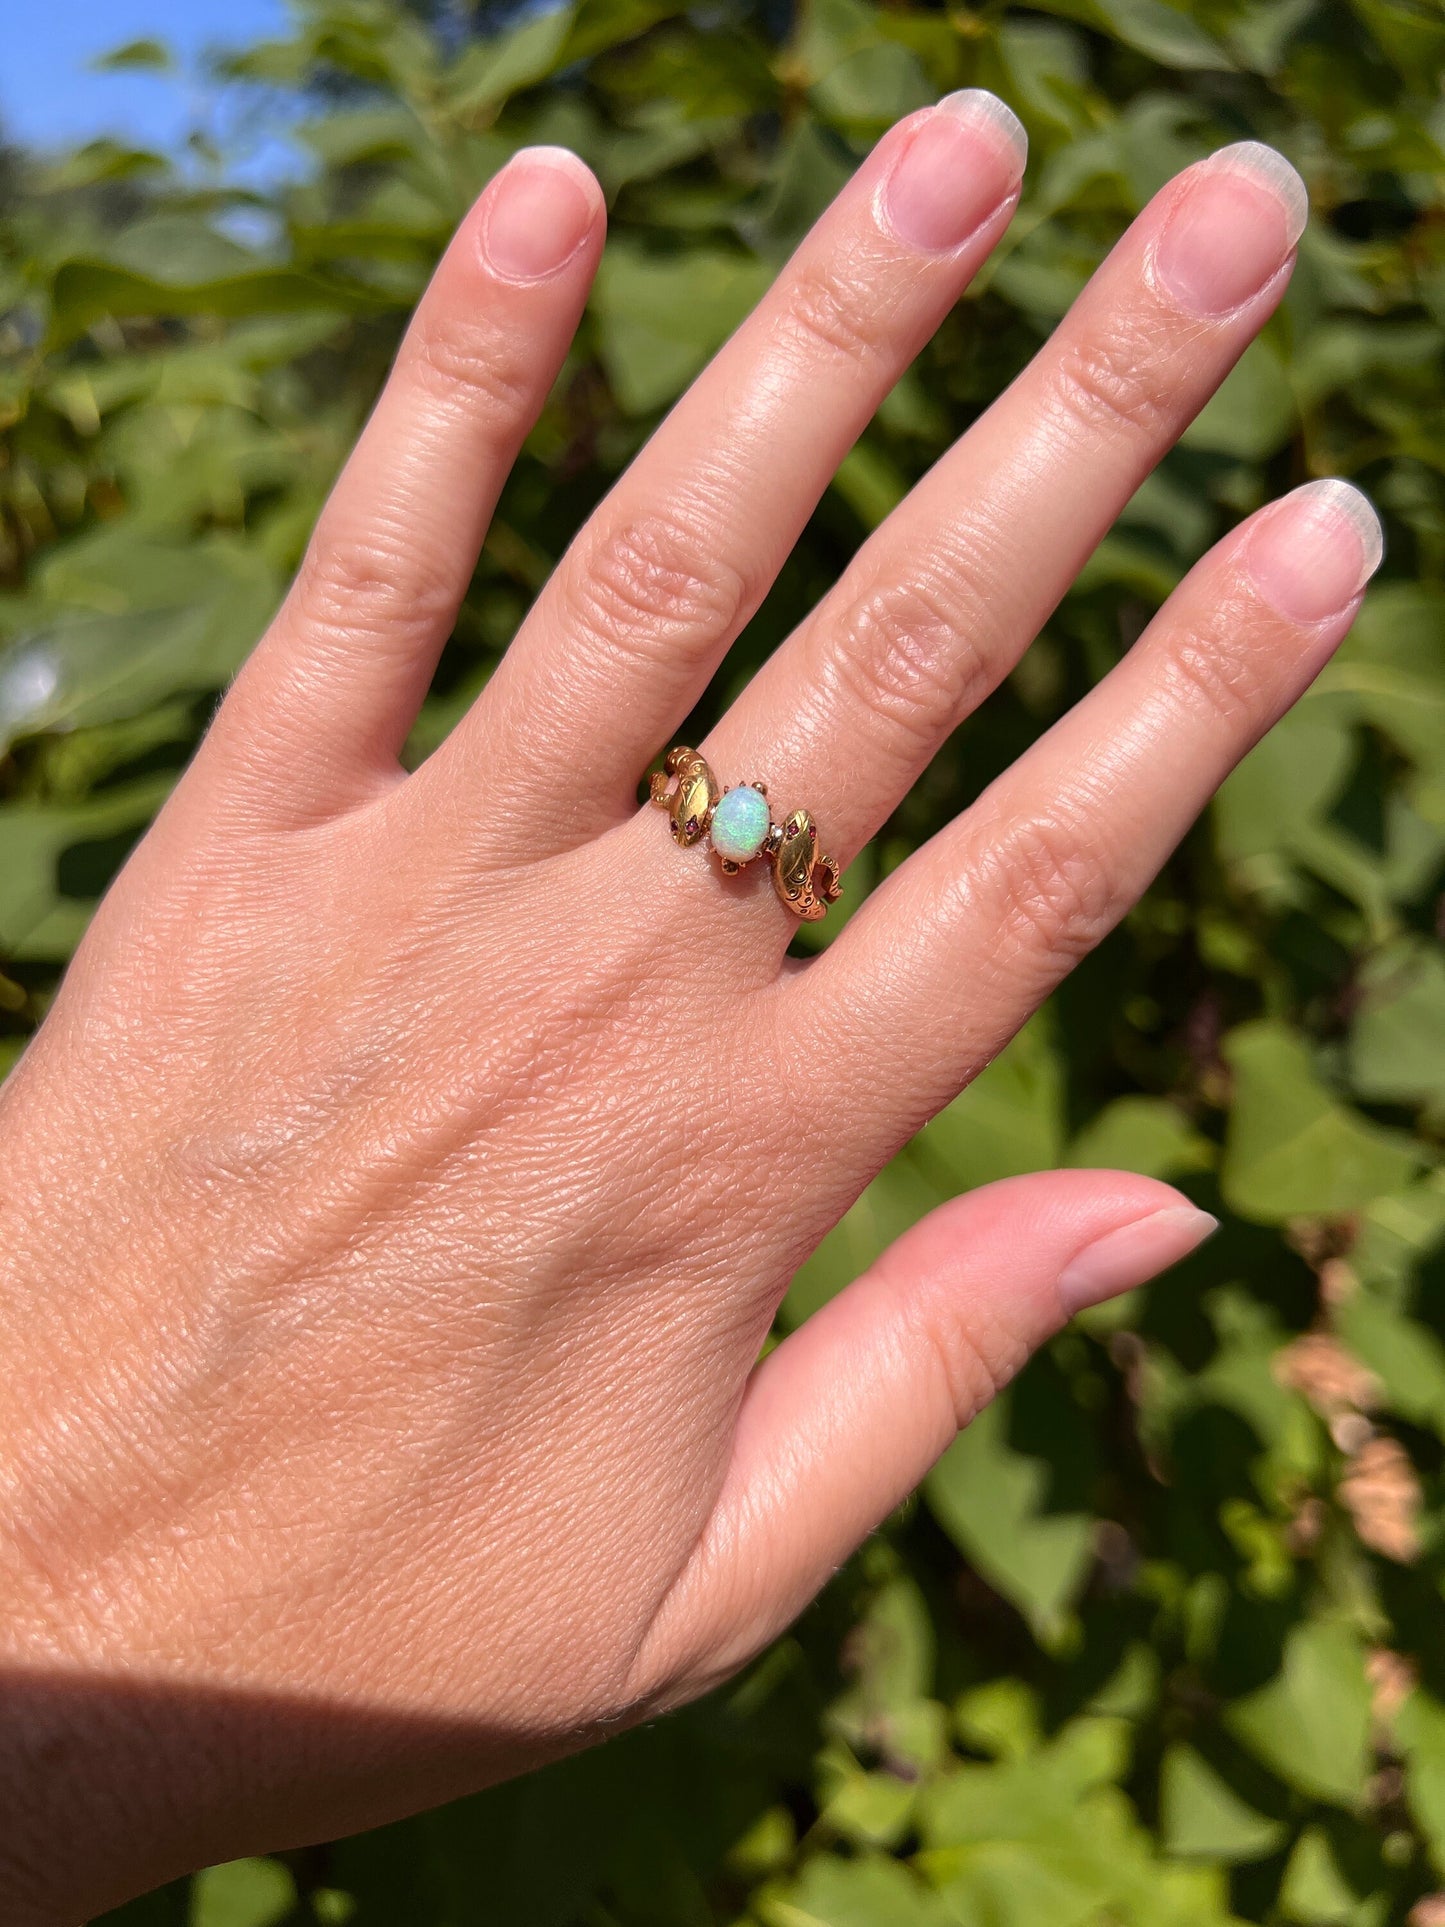 SNAKES Antique Victorian Blue OPAL 14k Gold Ring Ruby Eyes Double Coiled Stacker Band Romantic Gift Eternal Love Figural Serpents Tails